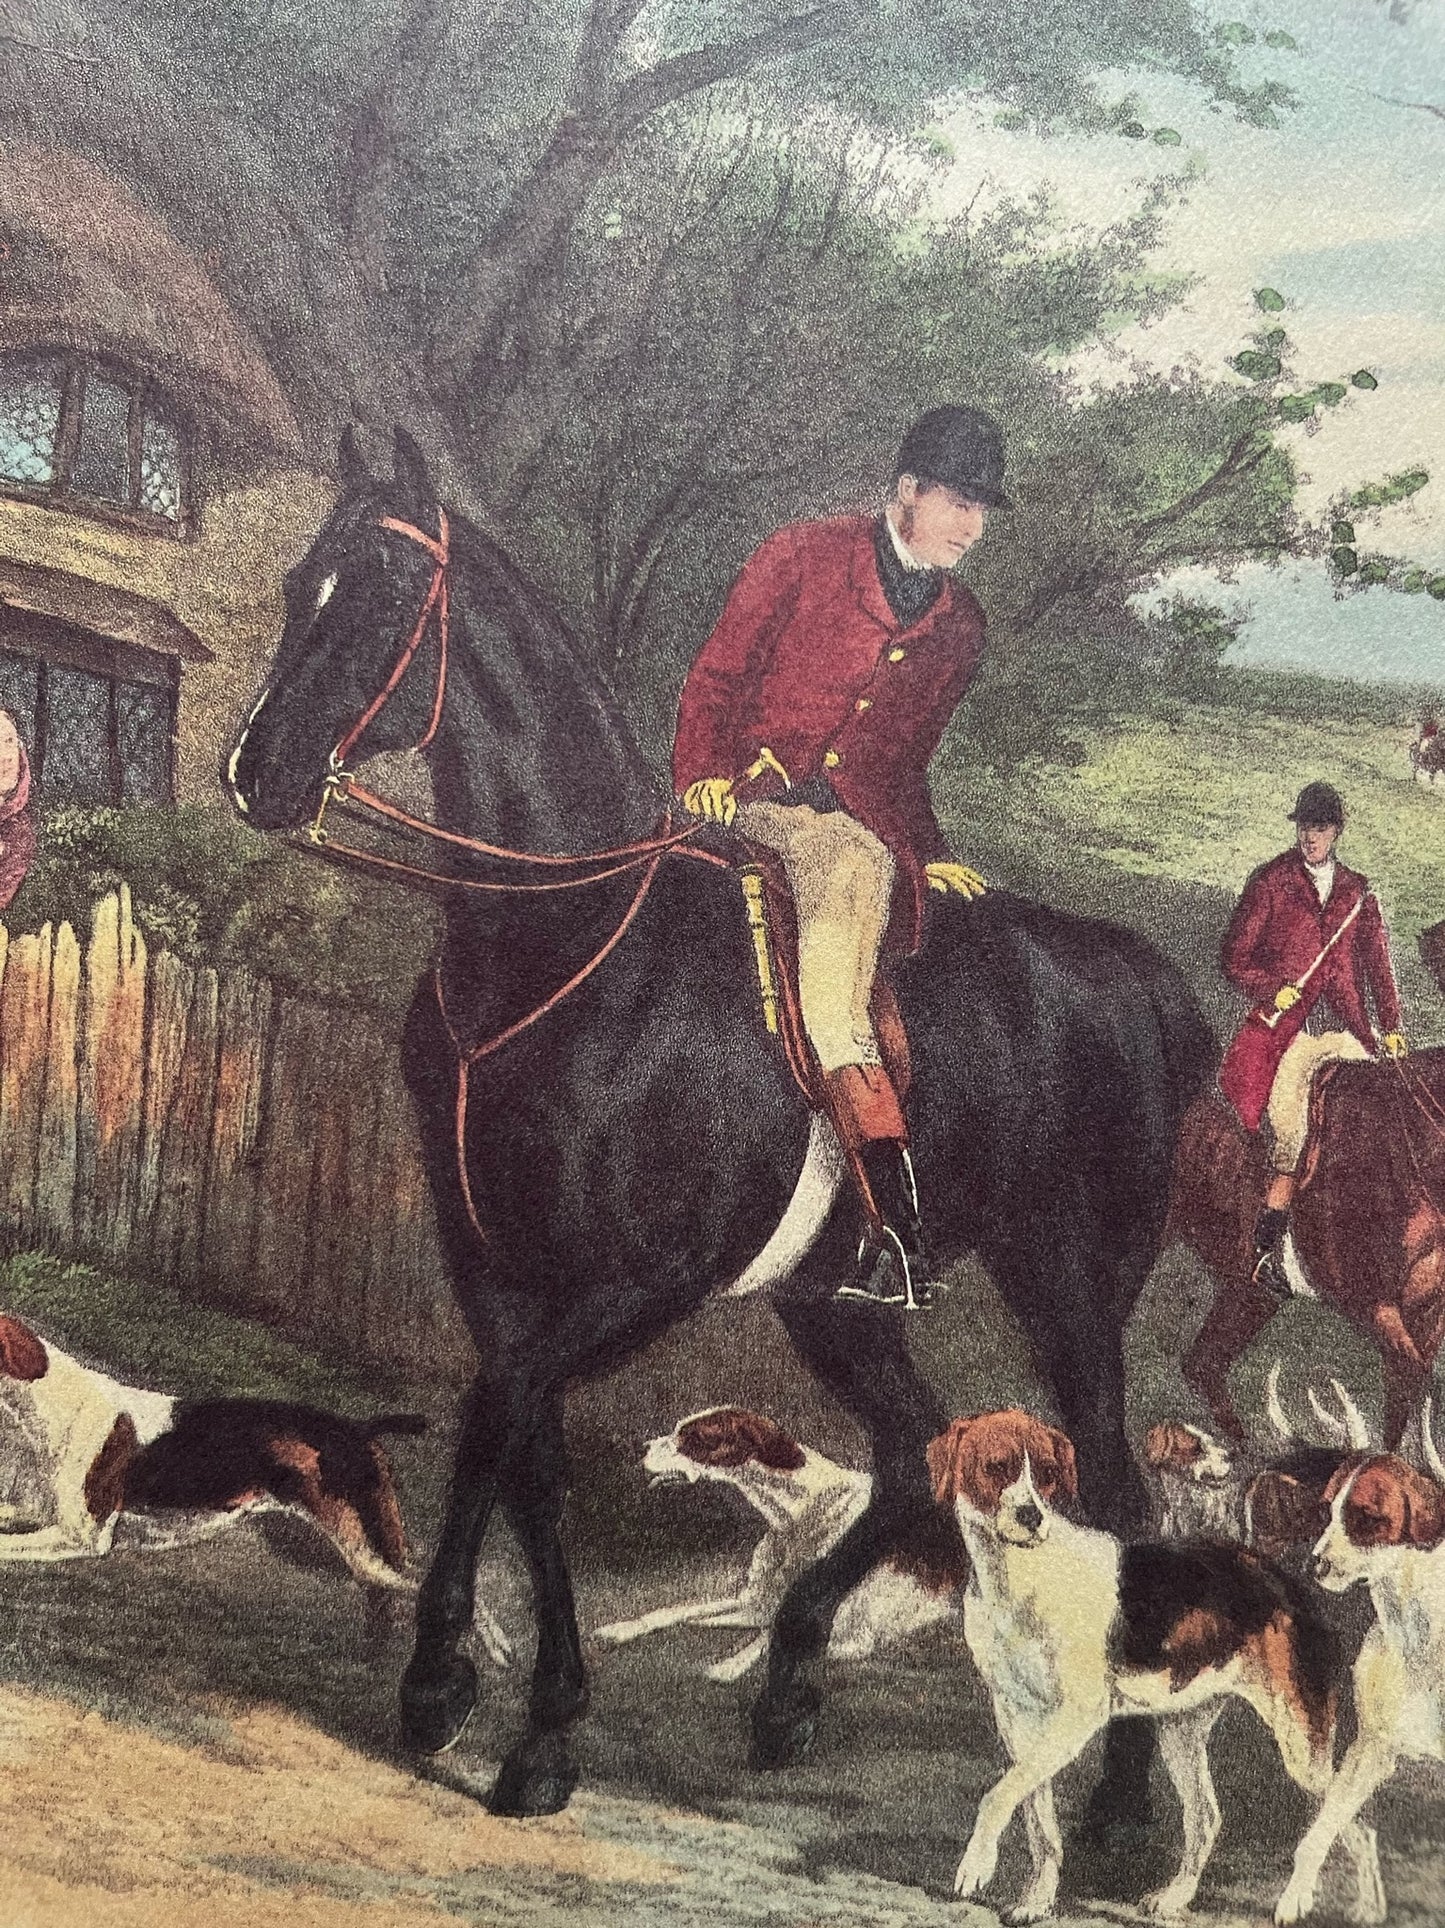 "Here Come the Hounds" Art Print